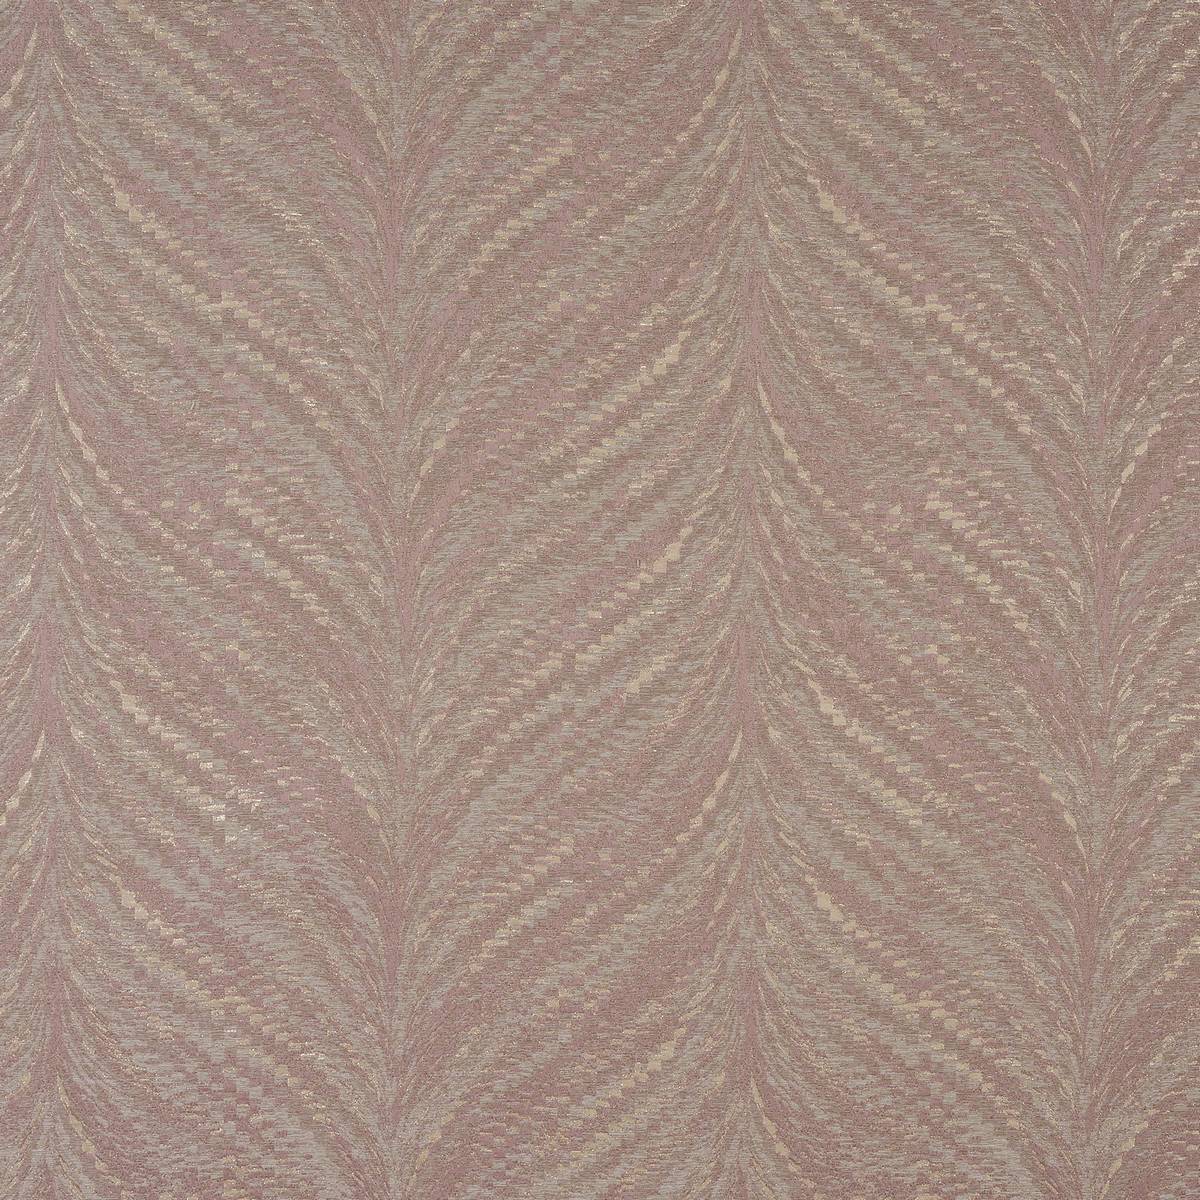 Luxor Rose Gold Fabric by Porter & Stone